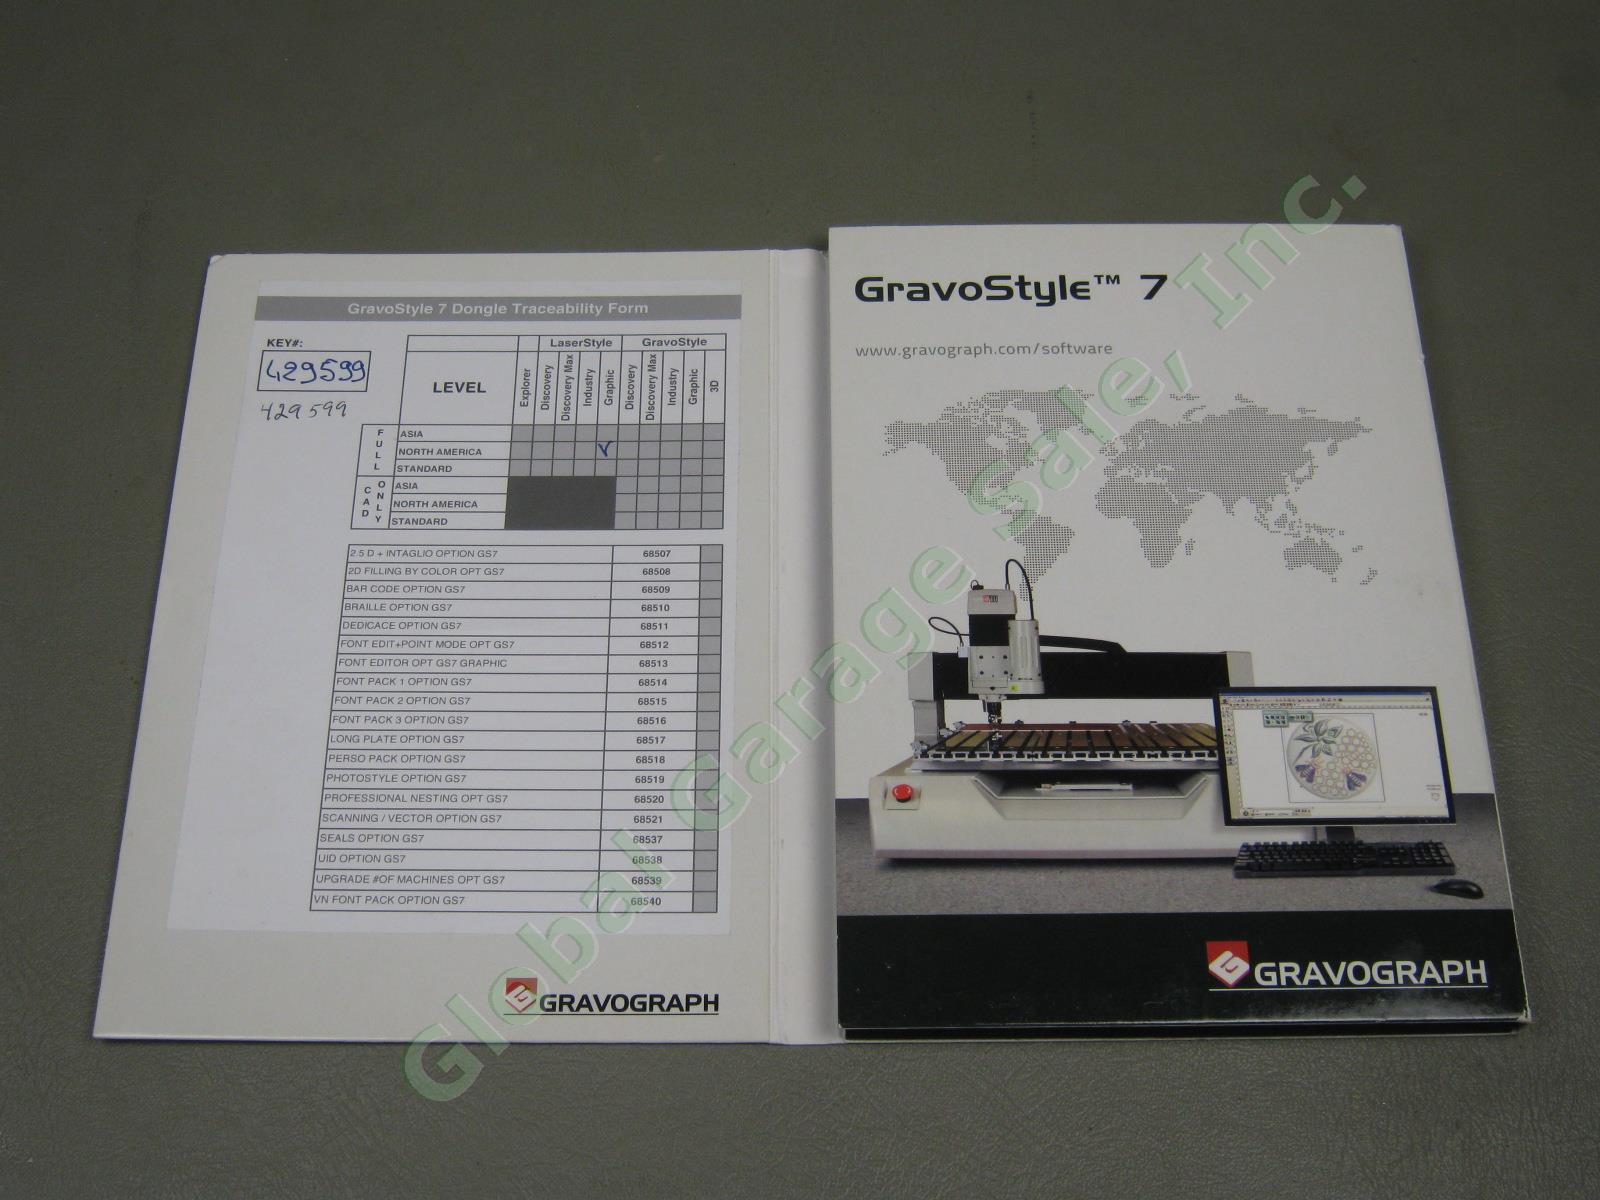 Gravograph GravoStyle 7 Full Graphic Level Engraving Machine Software W/ Dongle+ 1